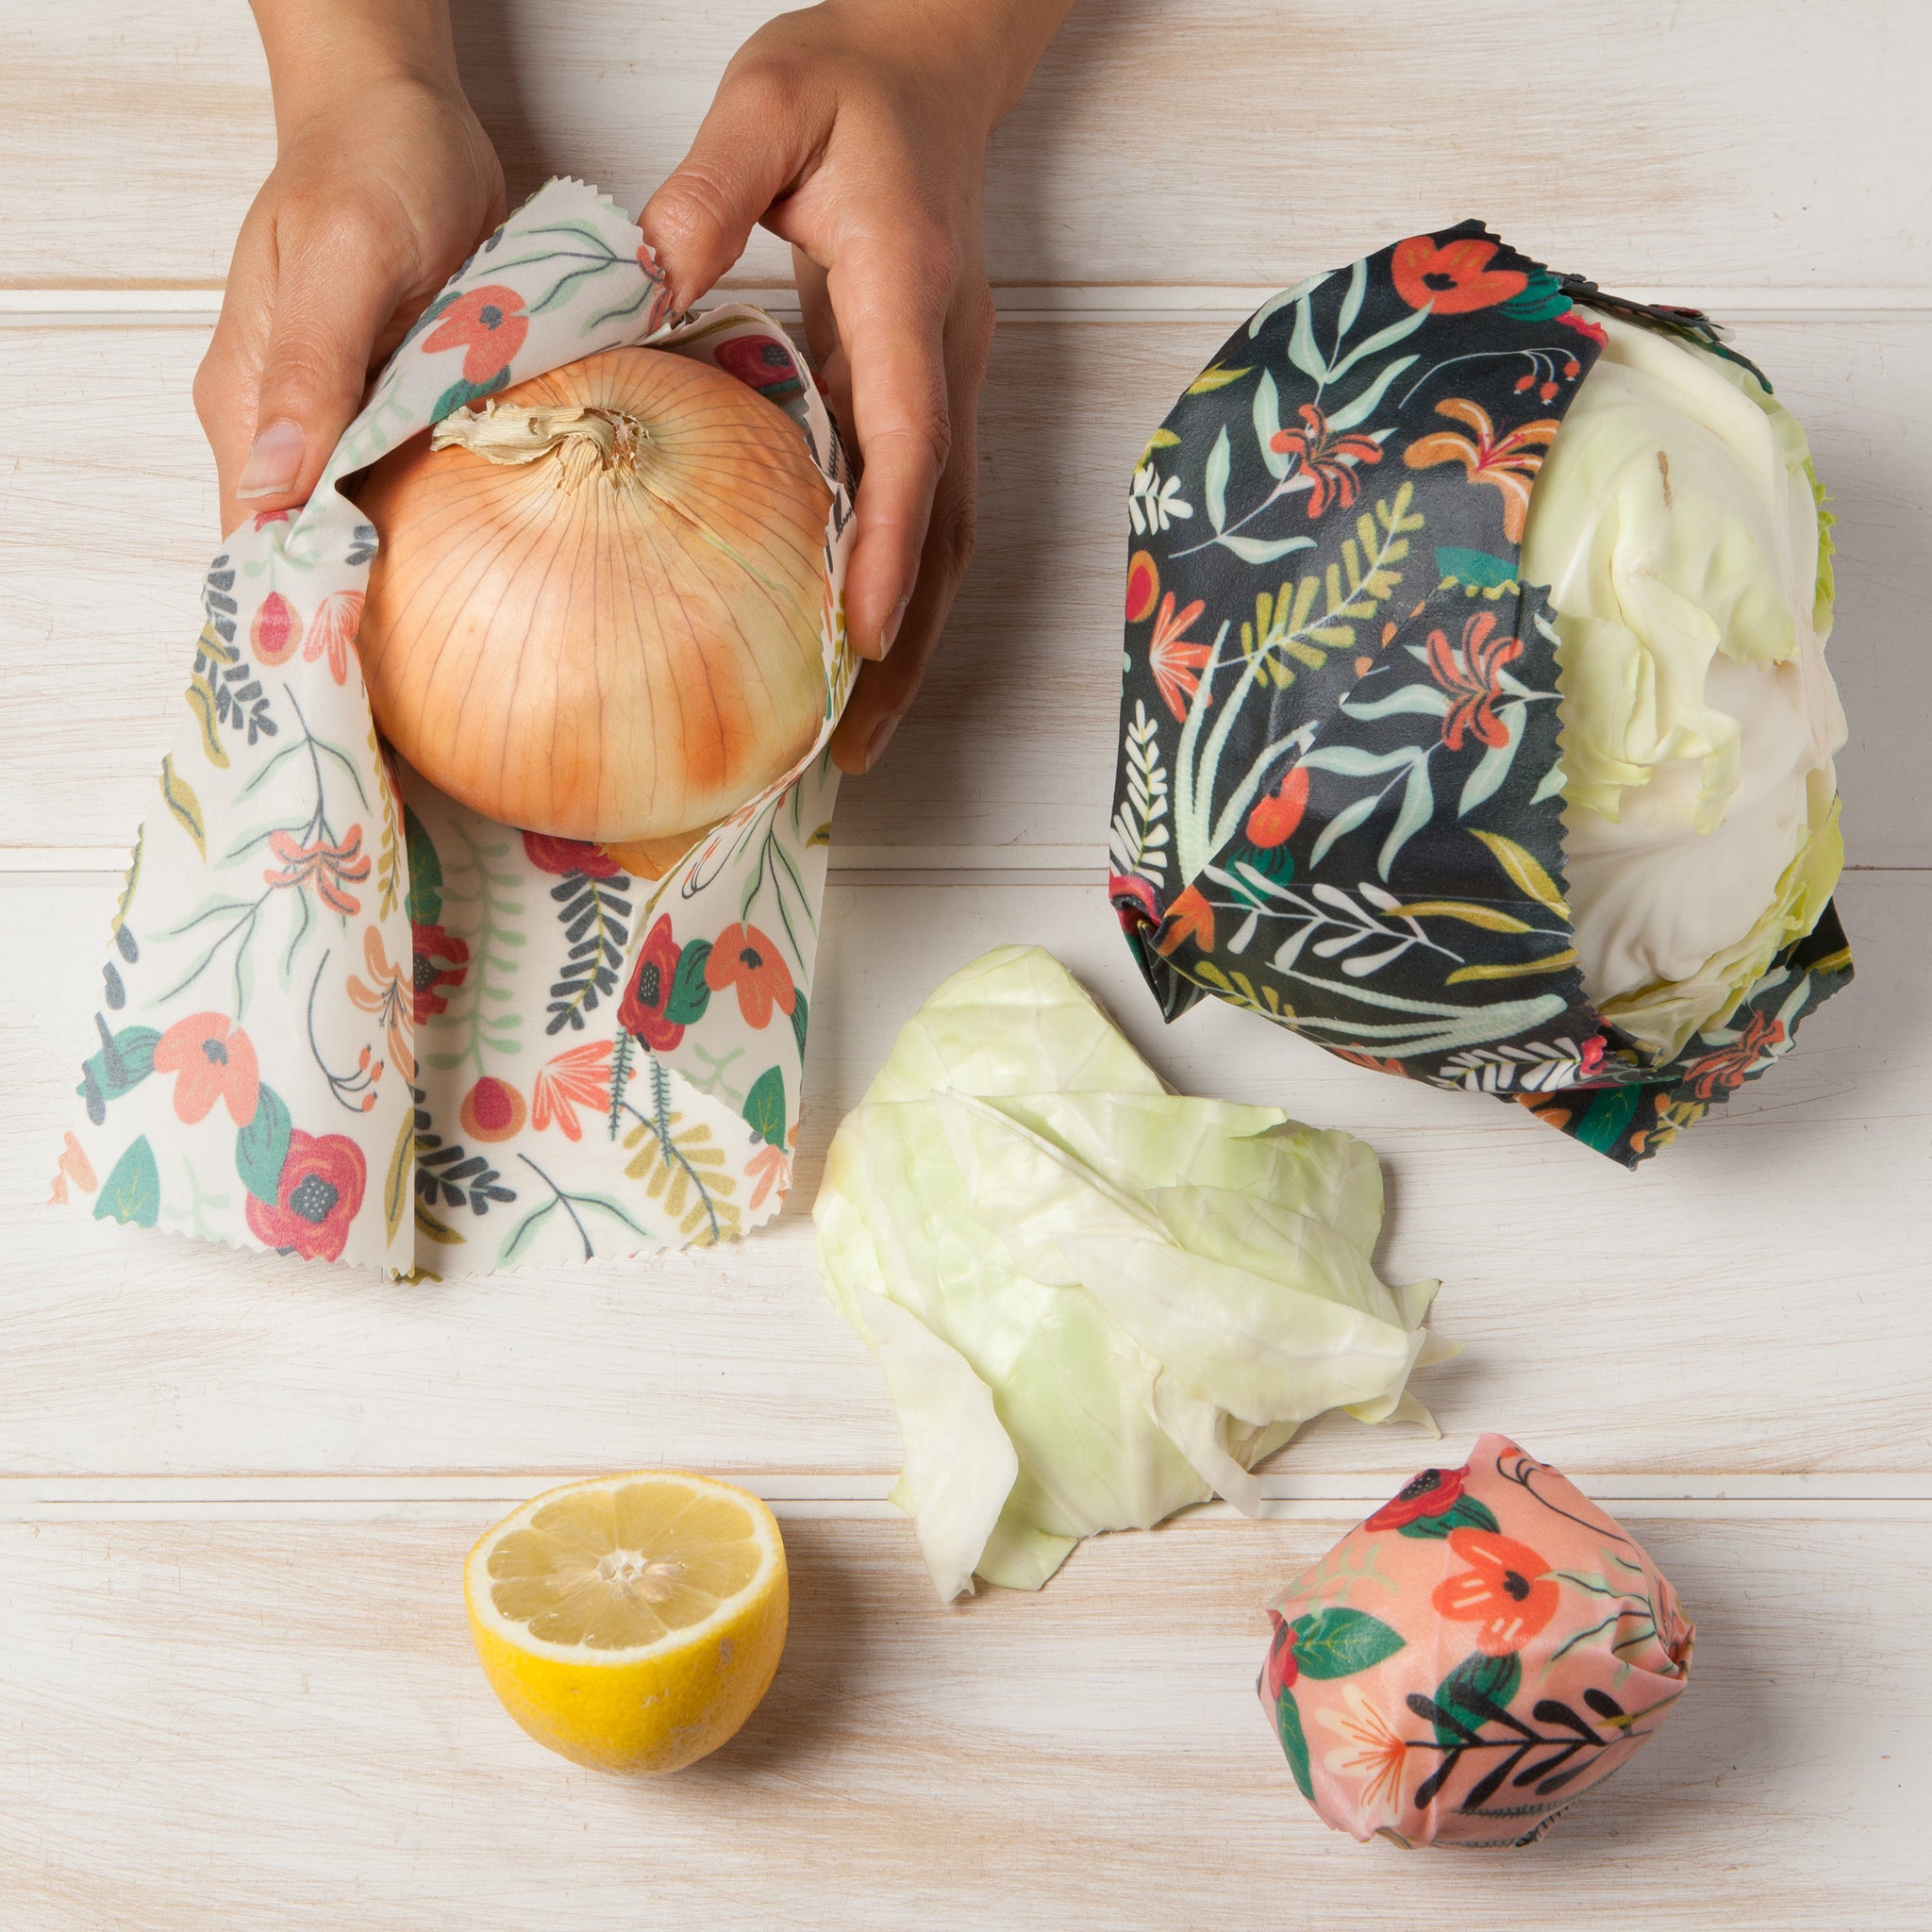 How to make beeswax wraps - Gardens Illustrated